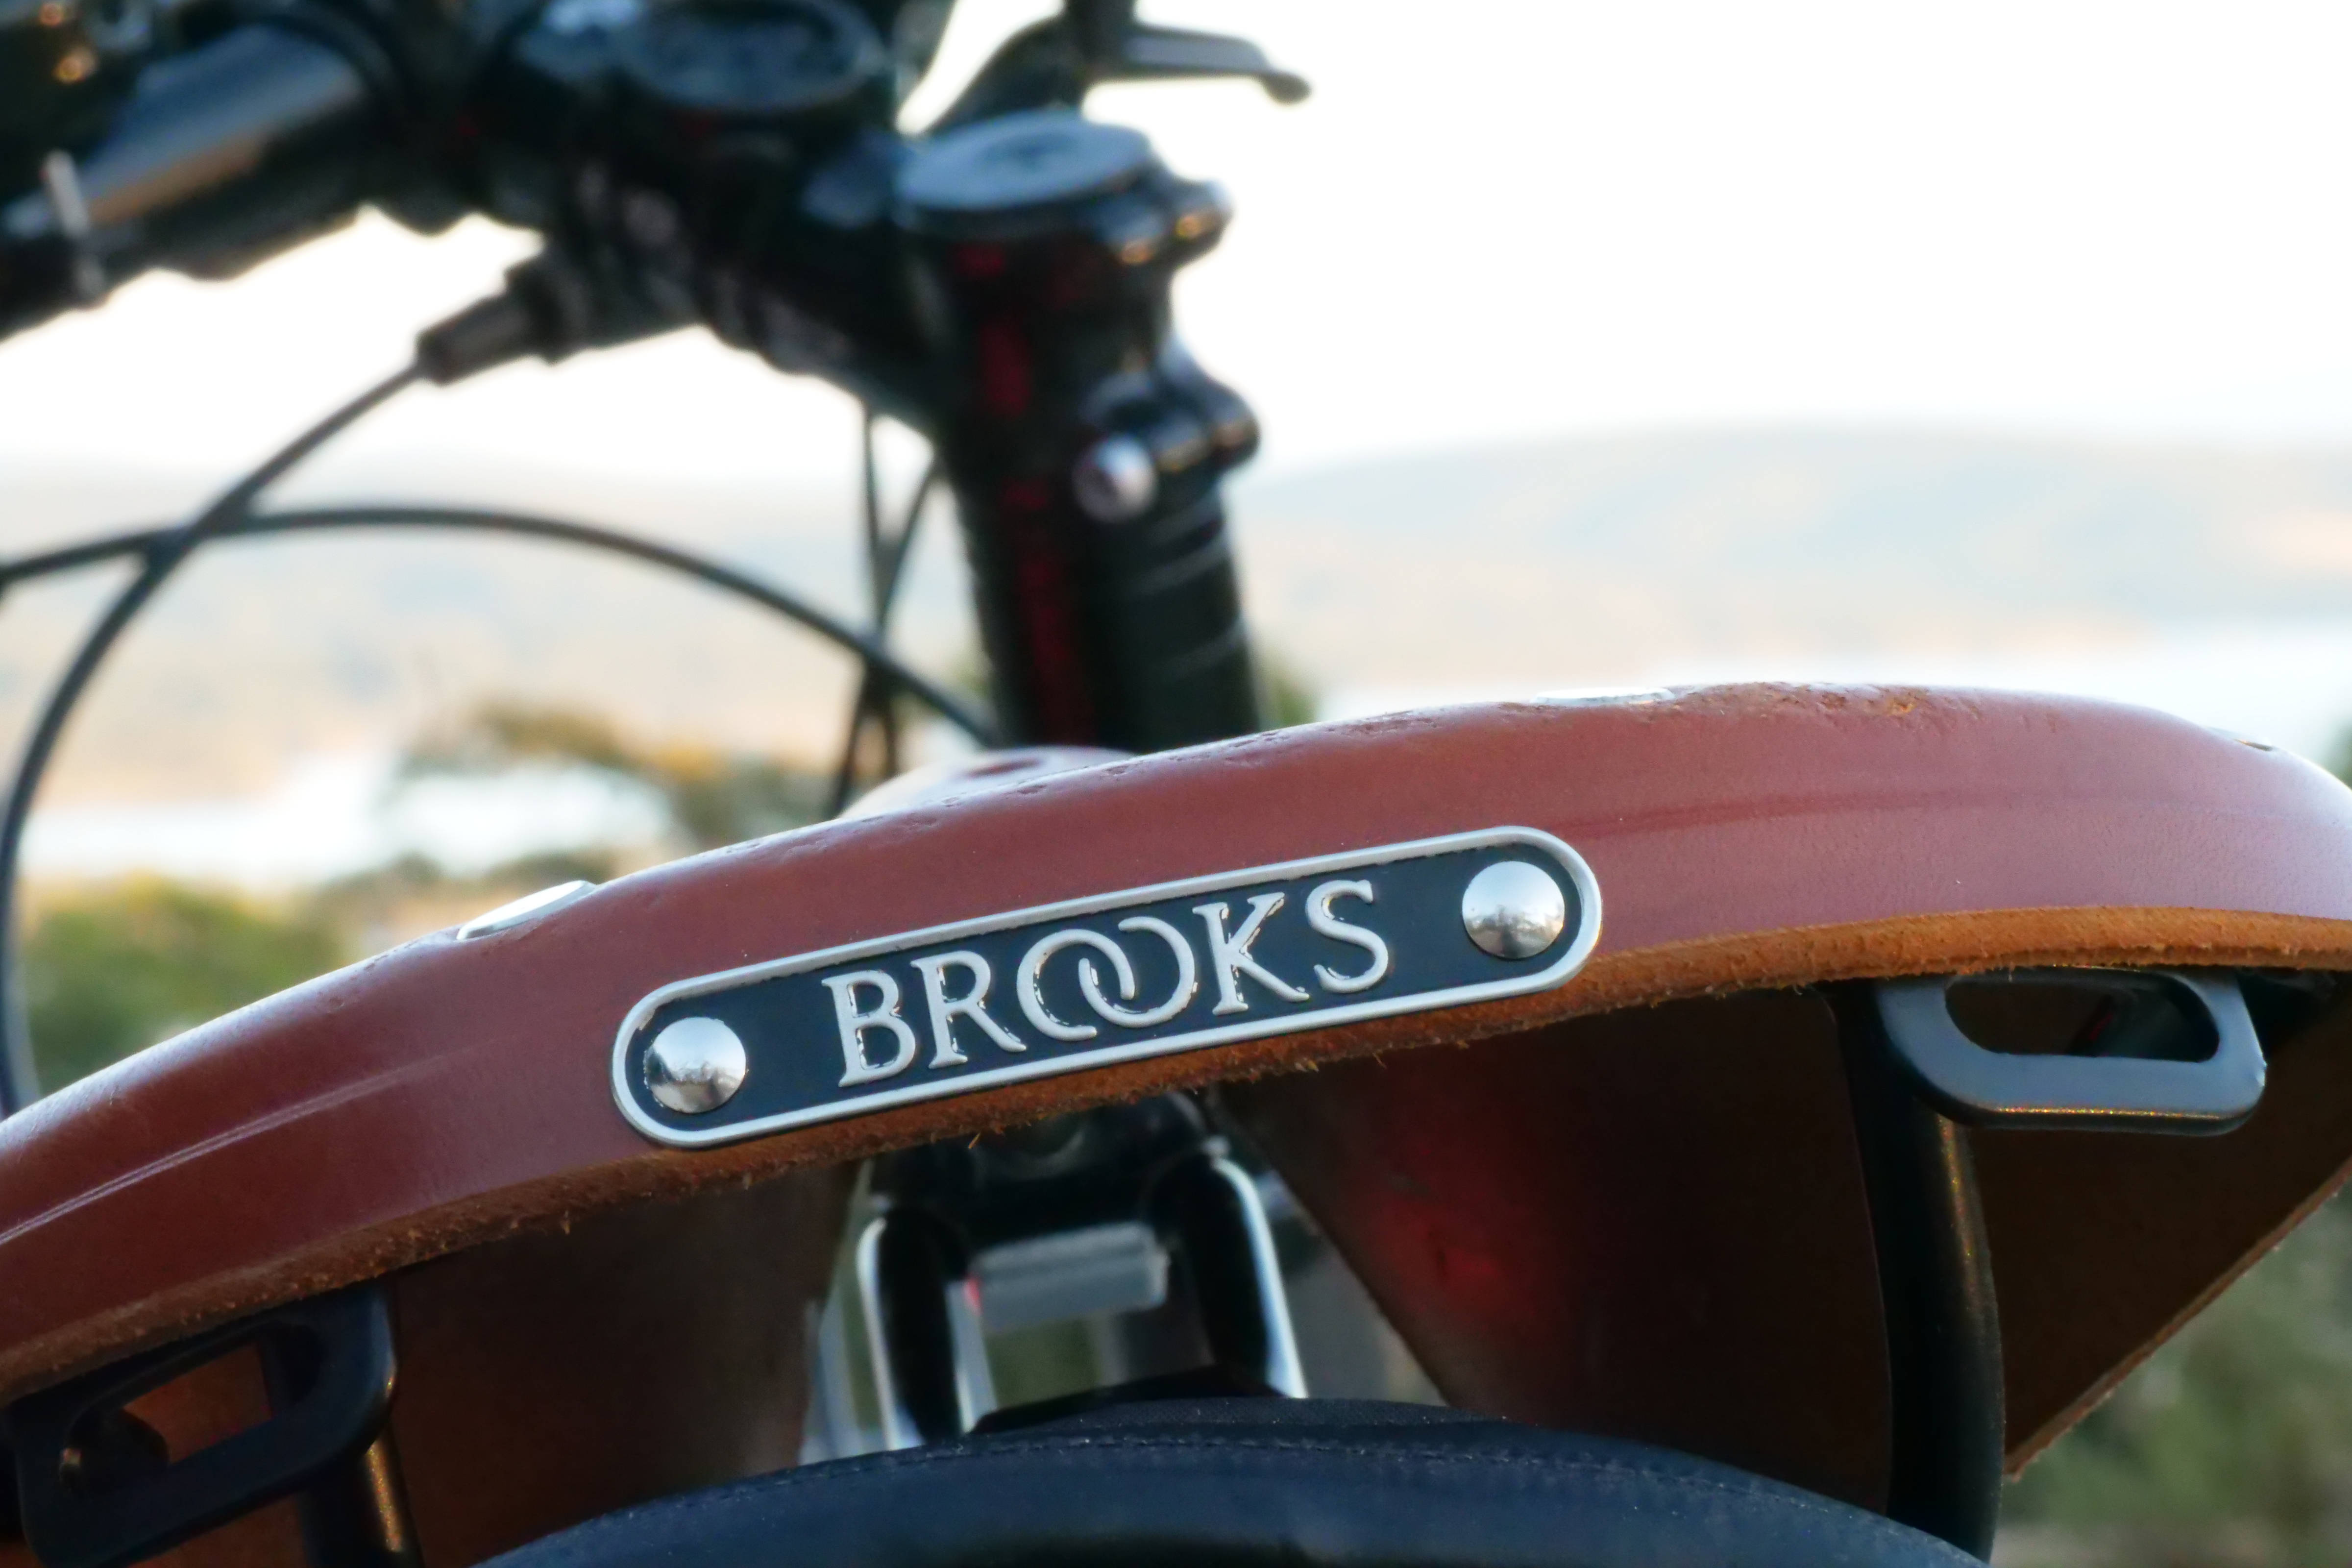 Rear view of Brooks tan leather bicycle saddle.